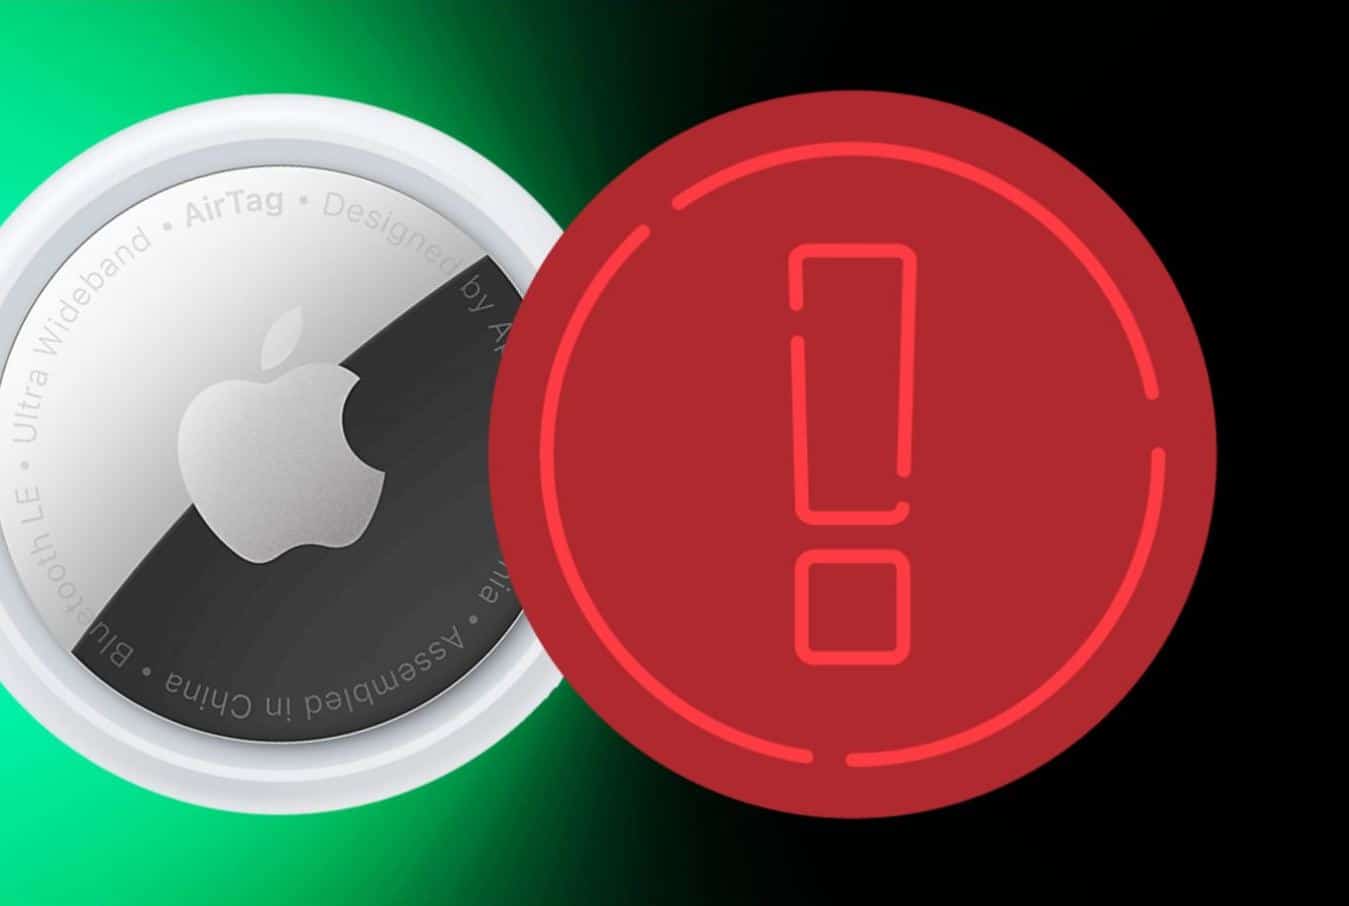 Apple AirTags can be used as trojan for credential hacking